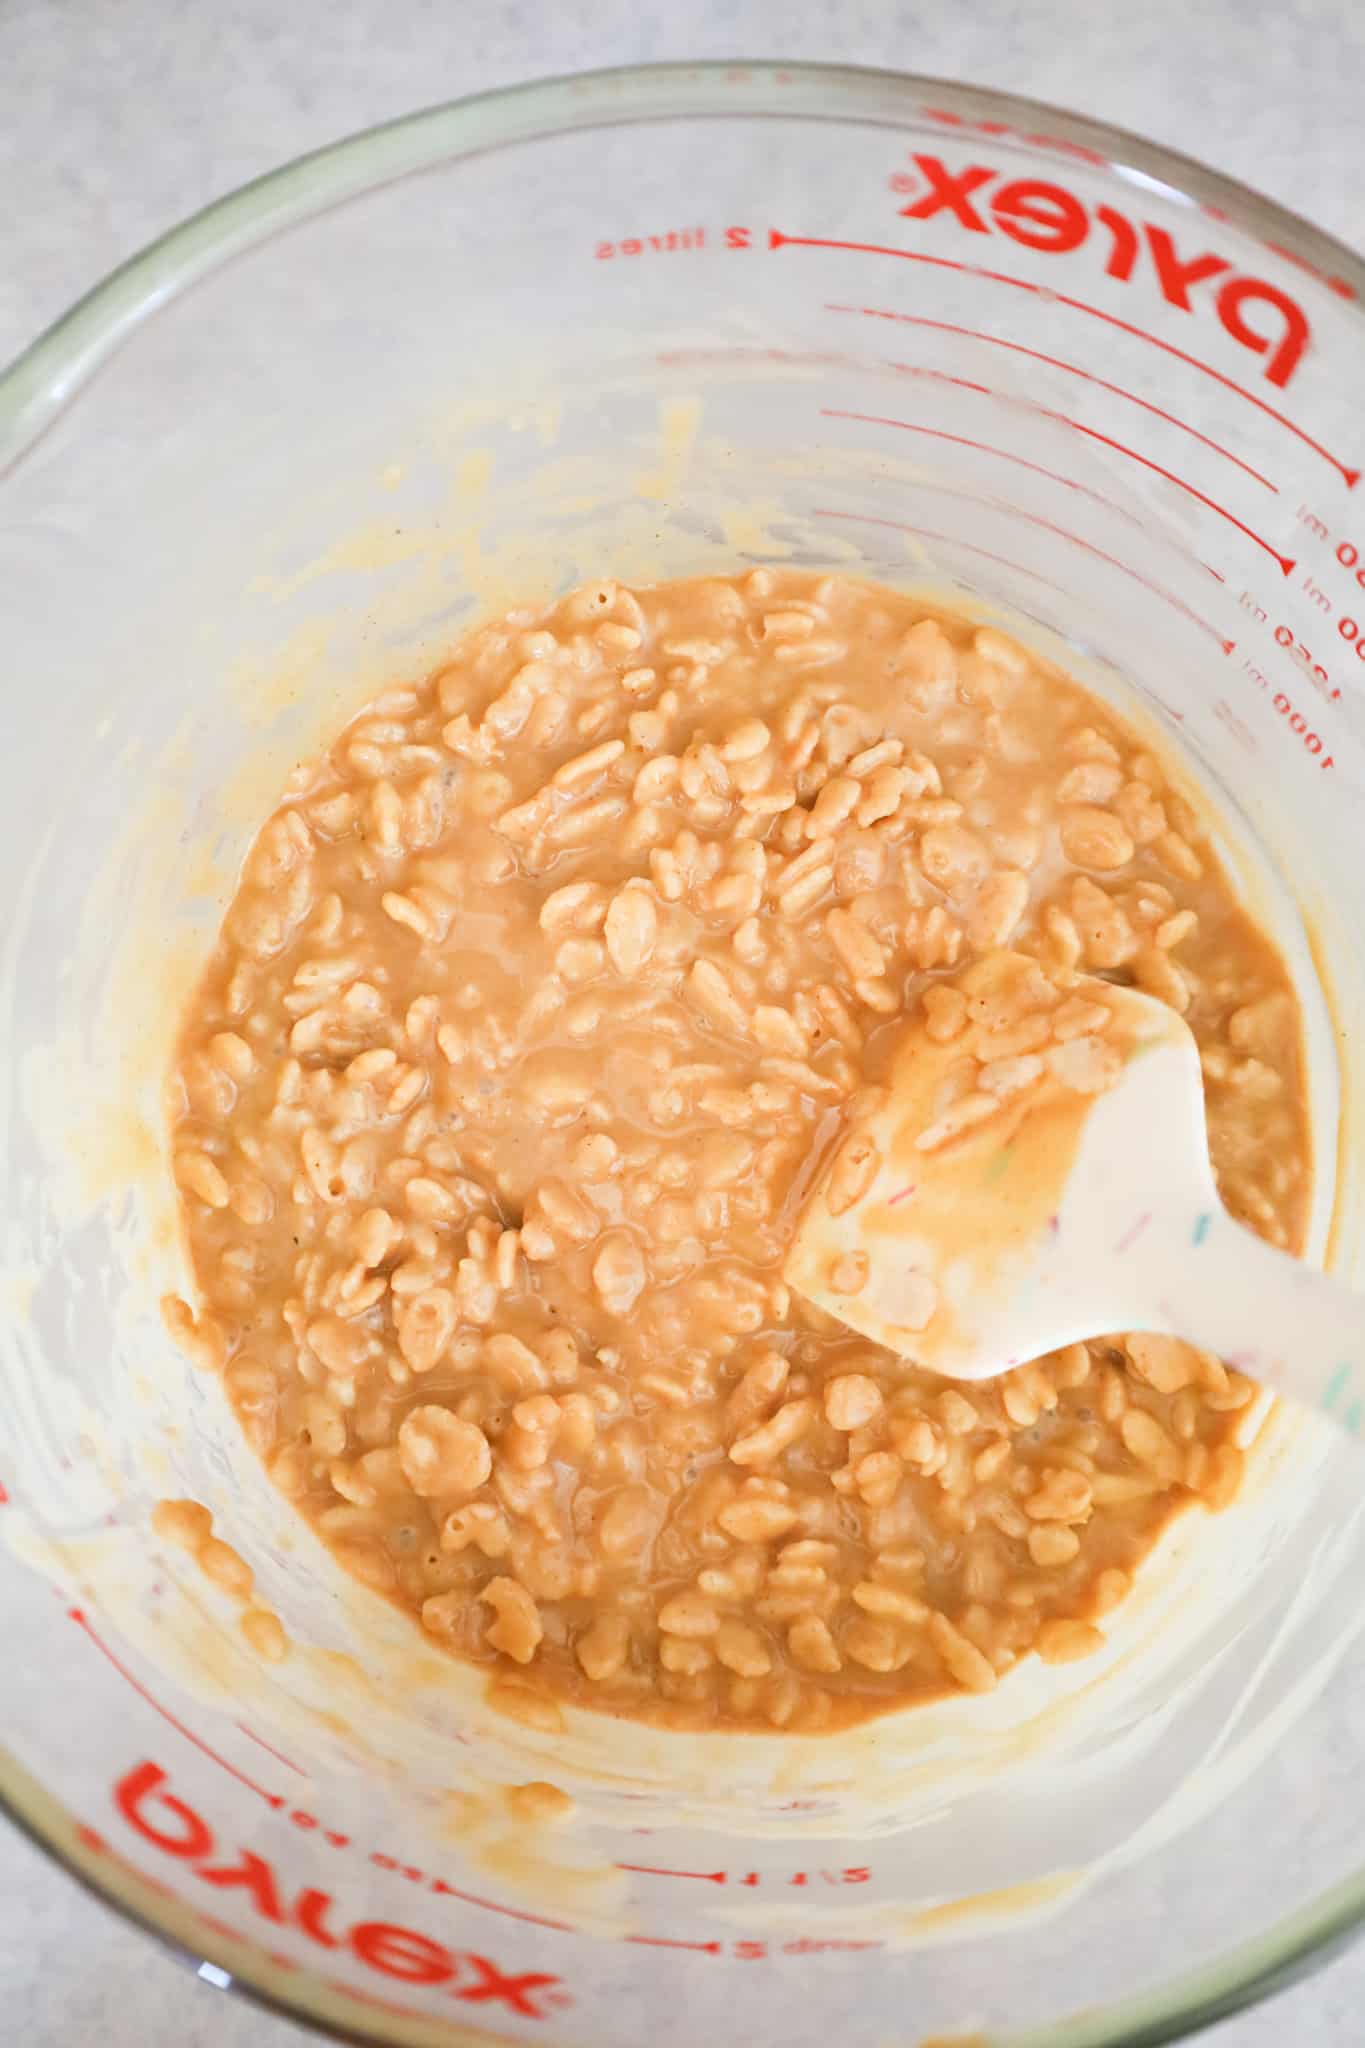 rice krispies being stirred into a melted peanut butter mixture in a glass bowl